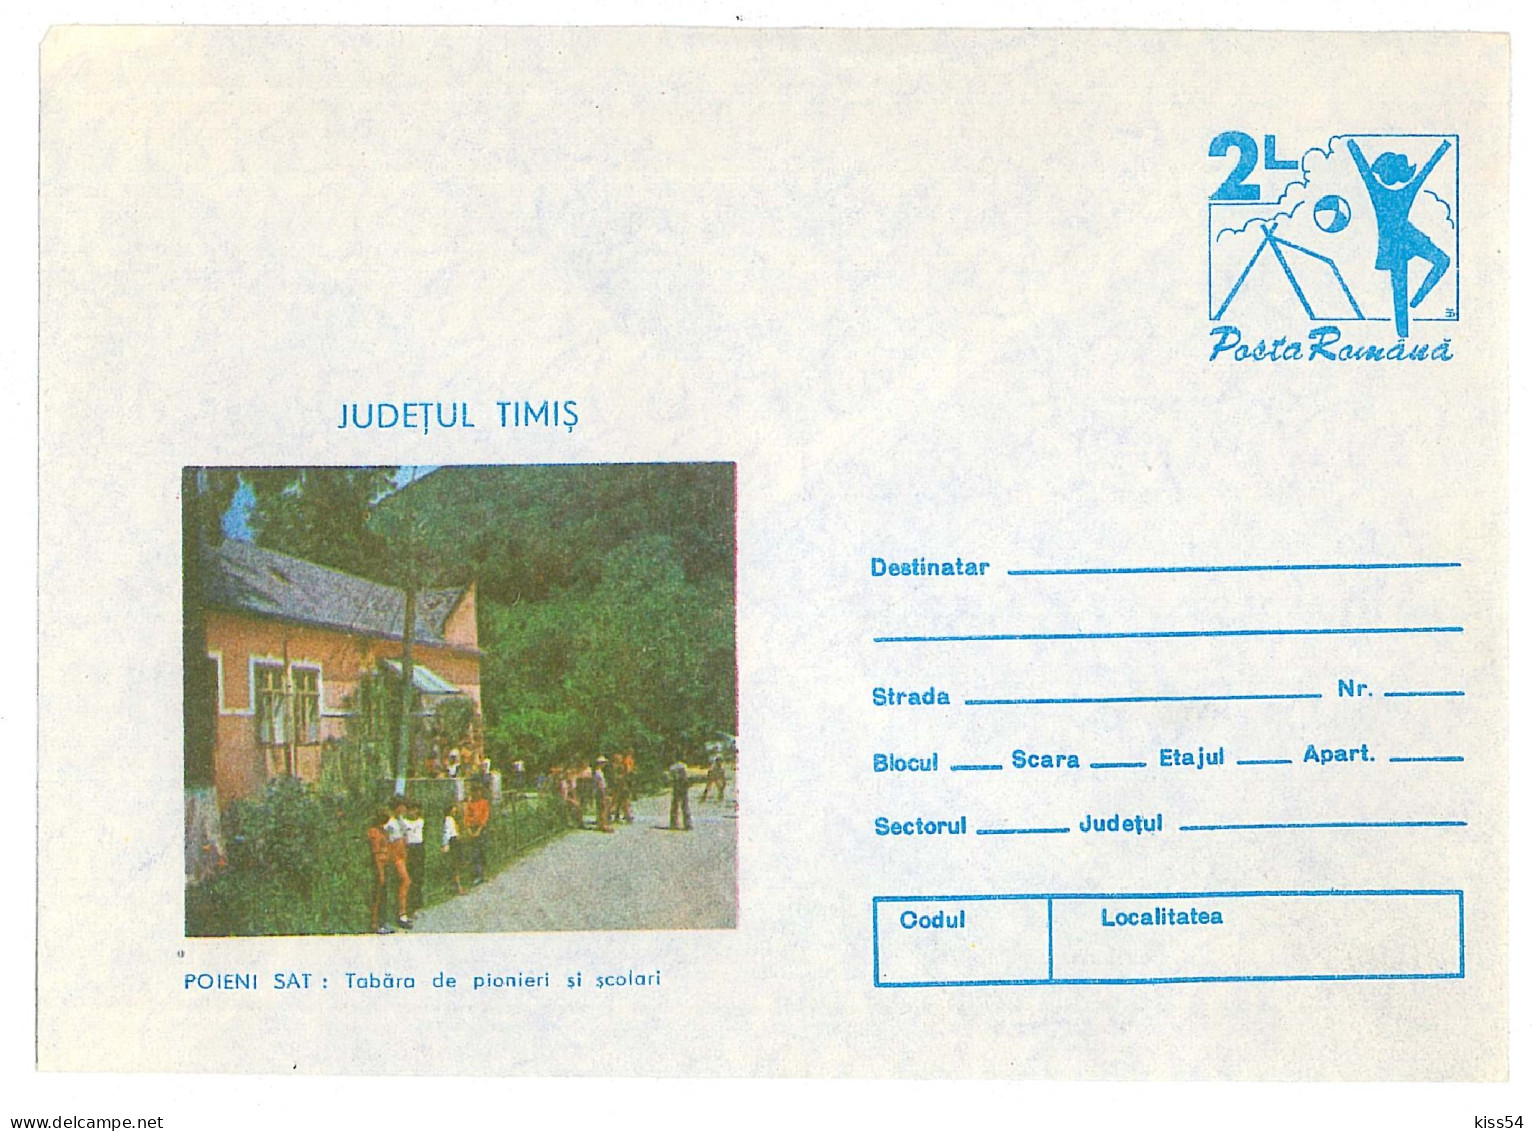 IP 84 - 99 POIENI SAT, Scout Camp - Stationery - Unused - 1984 - Postal Stationery